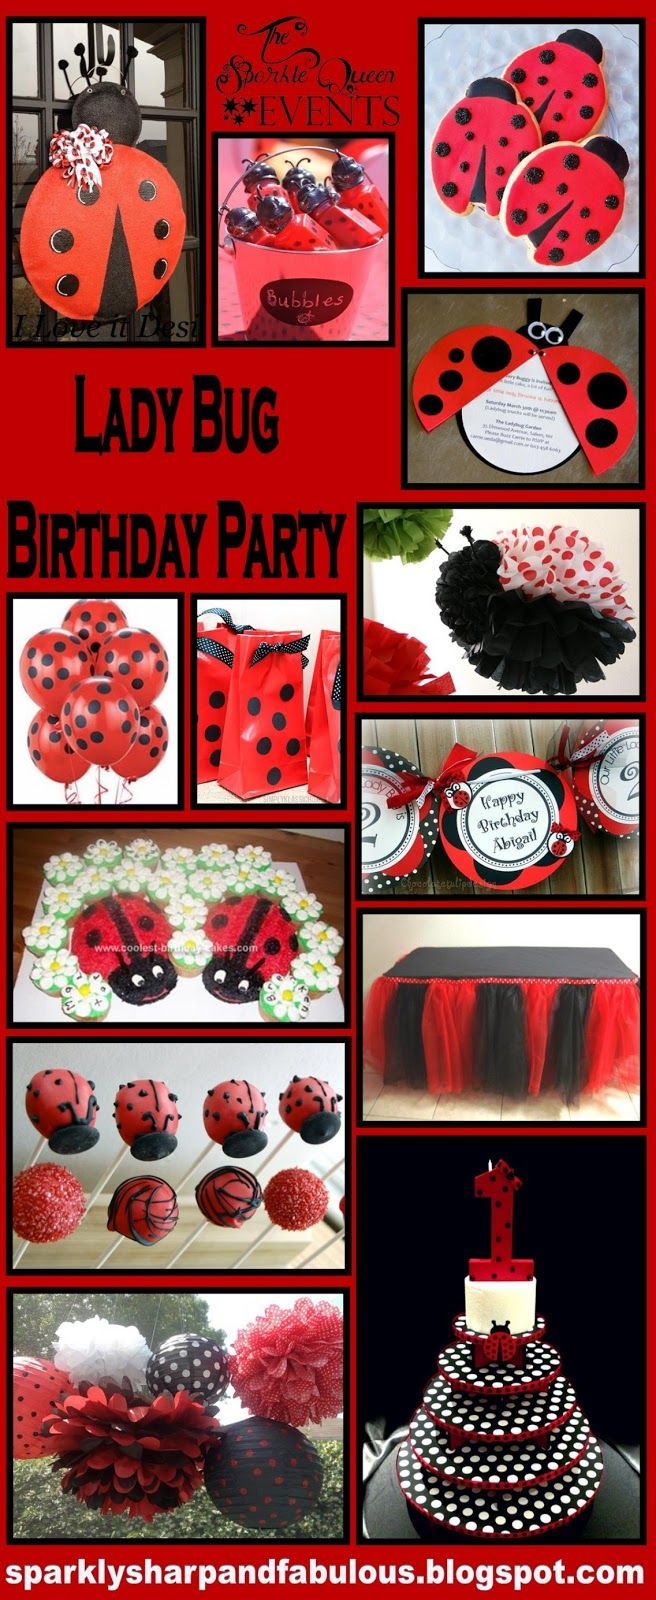 Check out this Blog for Birthday ideas…she does all the footwork for you!  Chocolatetulipdesign got a fe